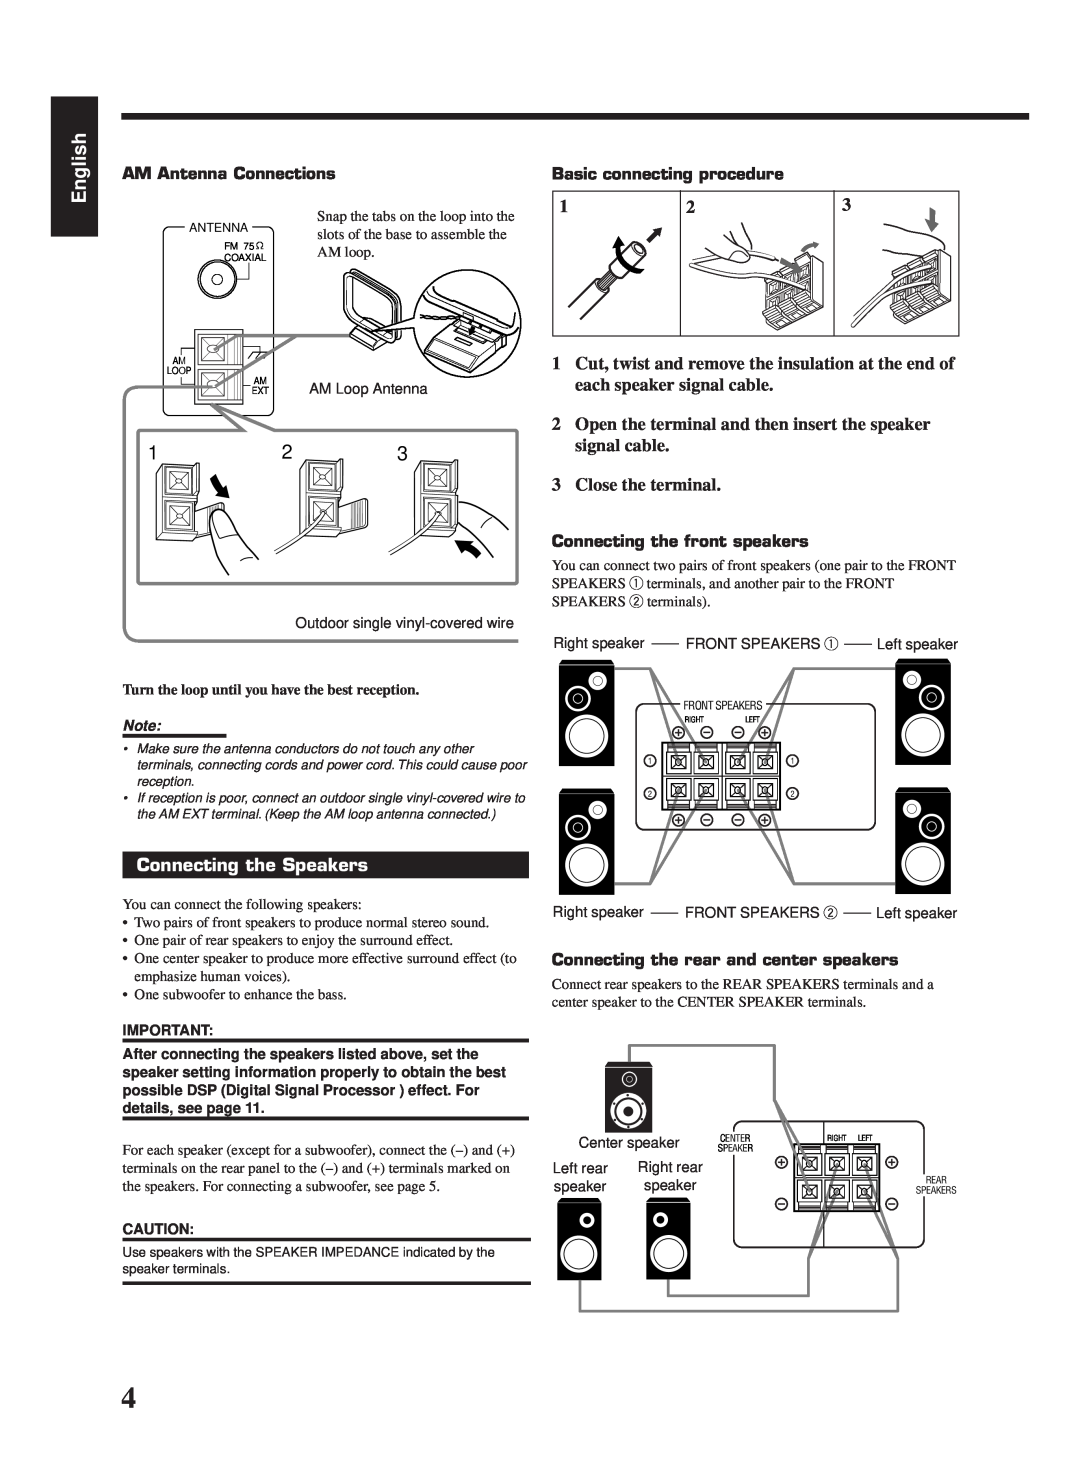 JVC RX-558VBK manual Connecting the Speakers, English, AM Antenna ConnectionsBasic connecting procedure 